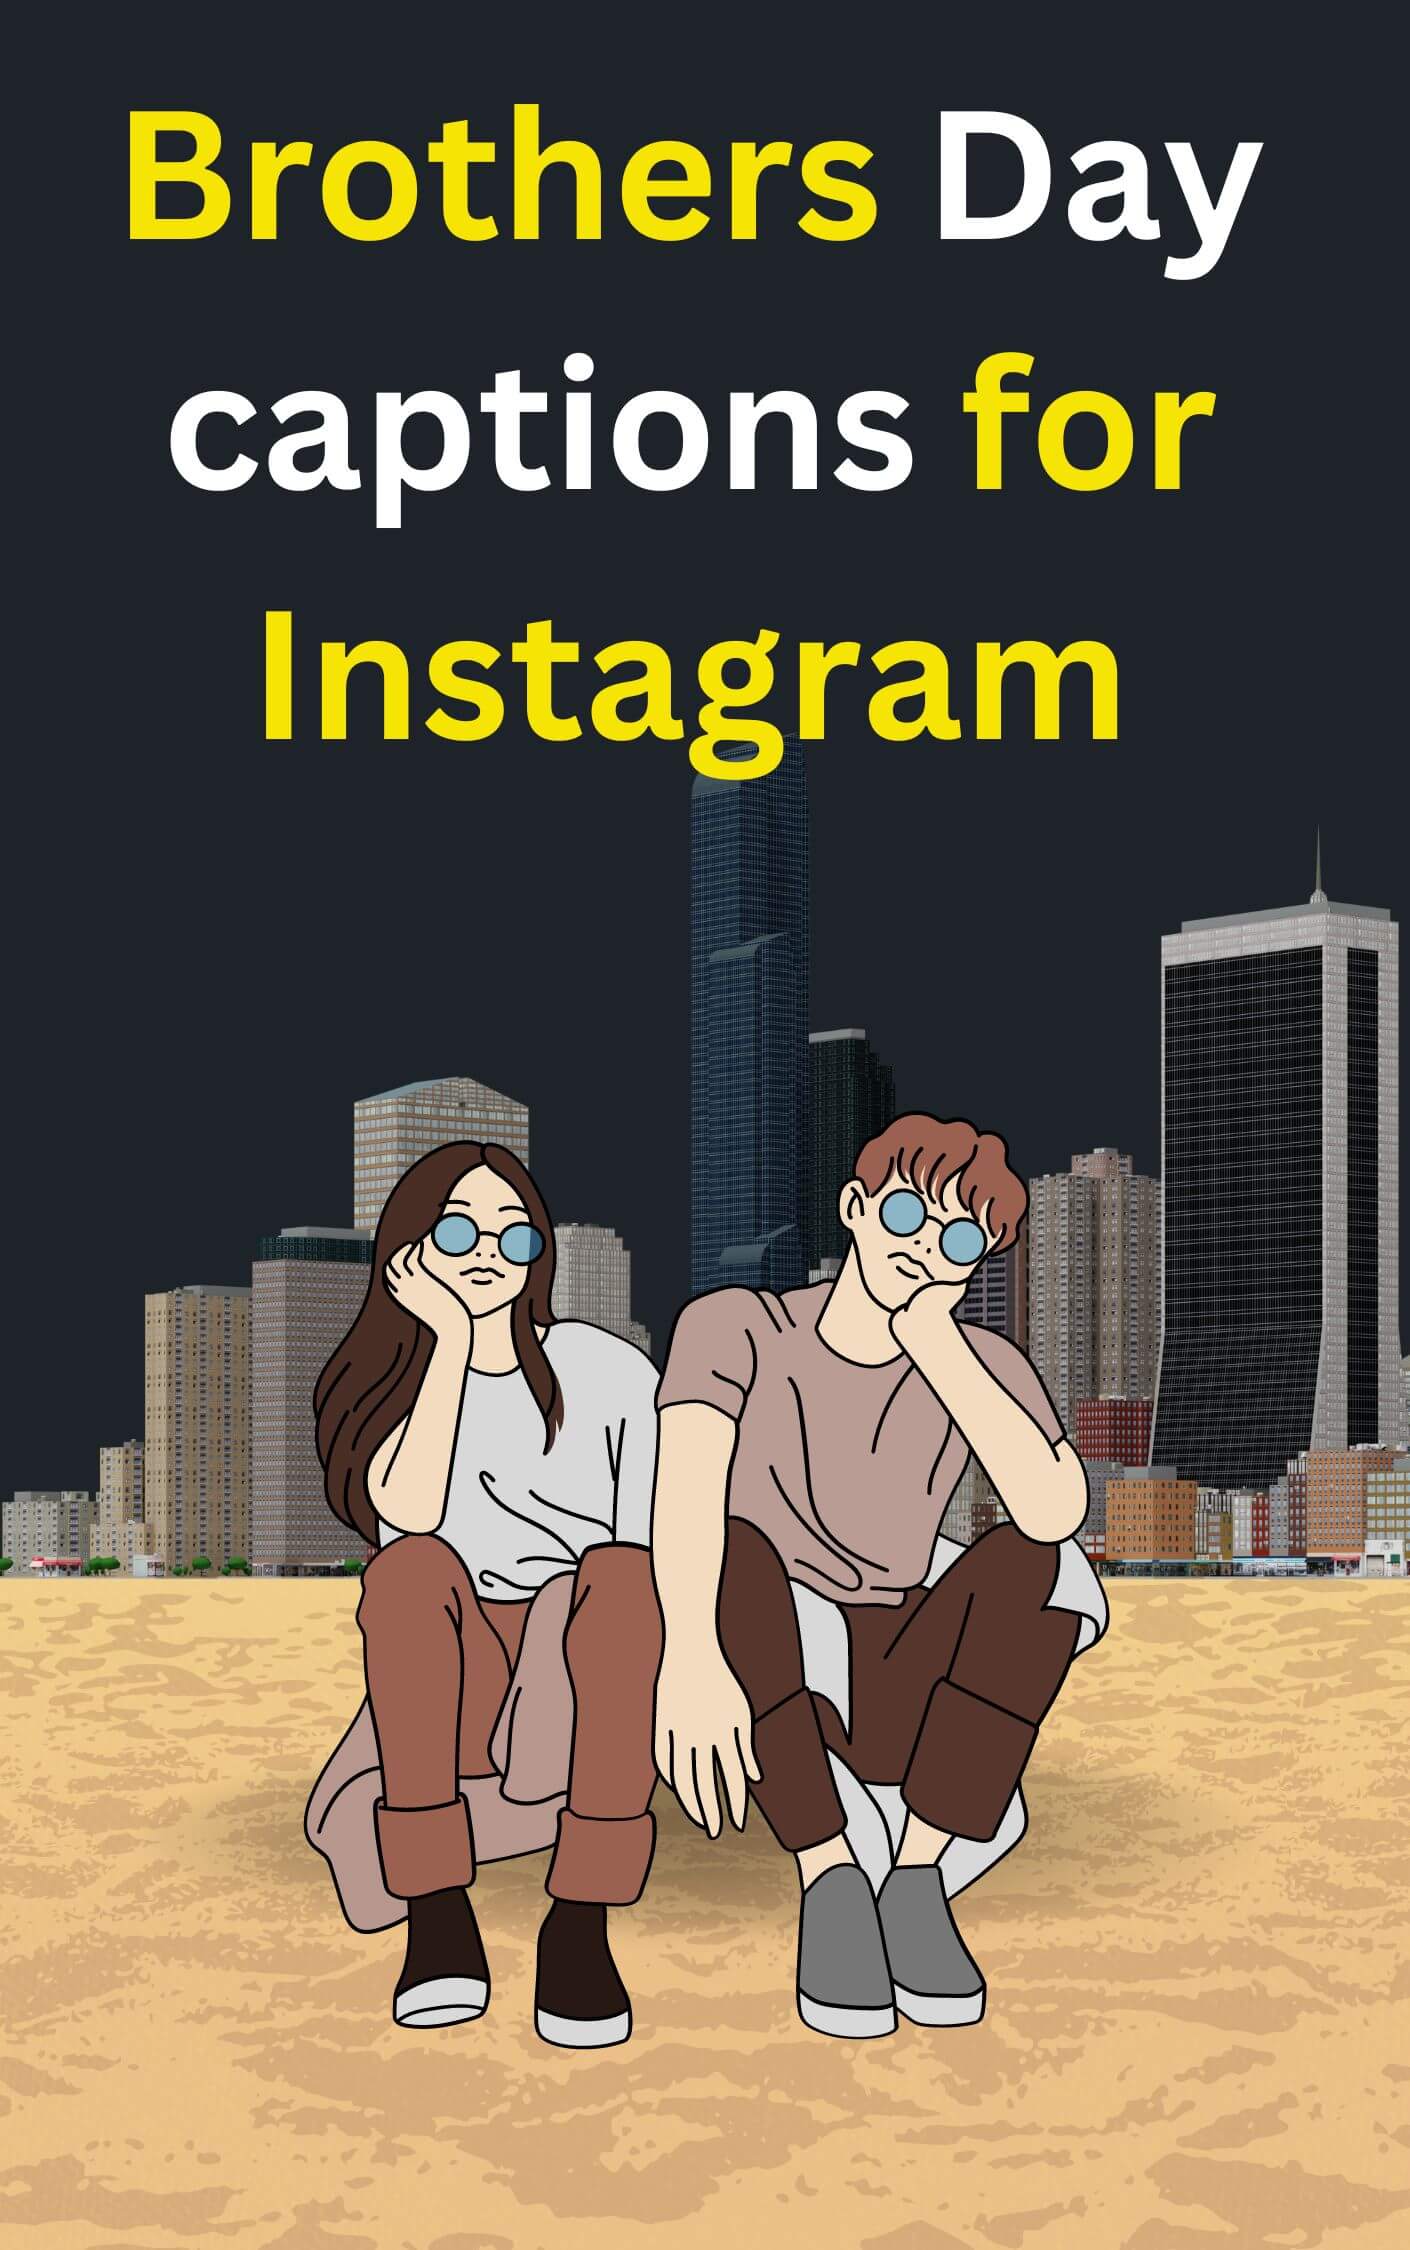 Brothers Day captions for Instagram